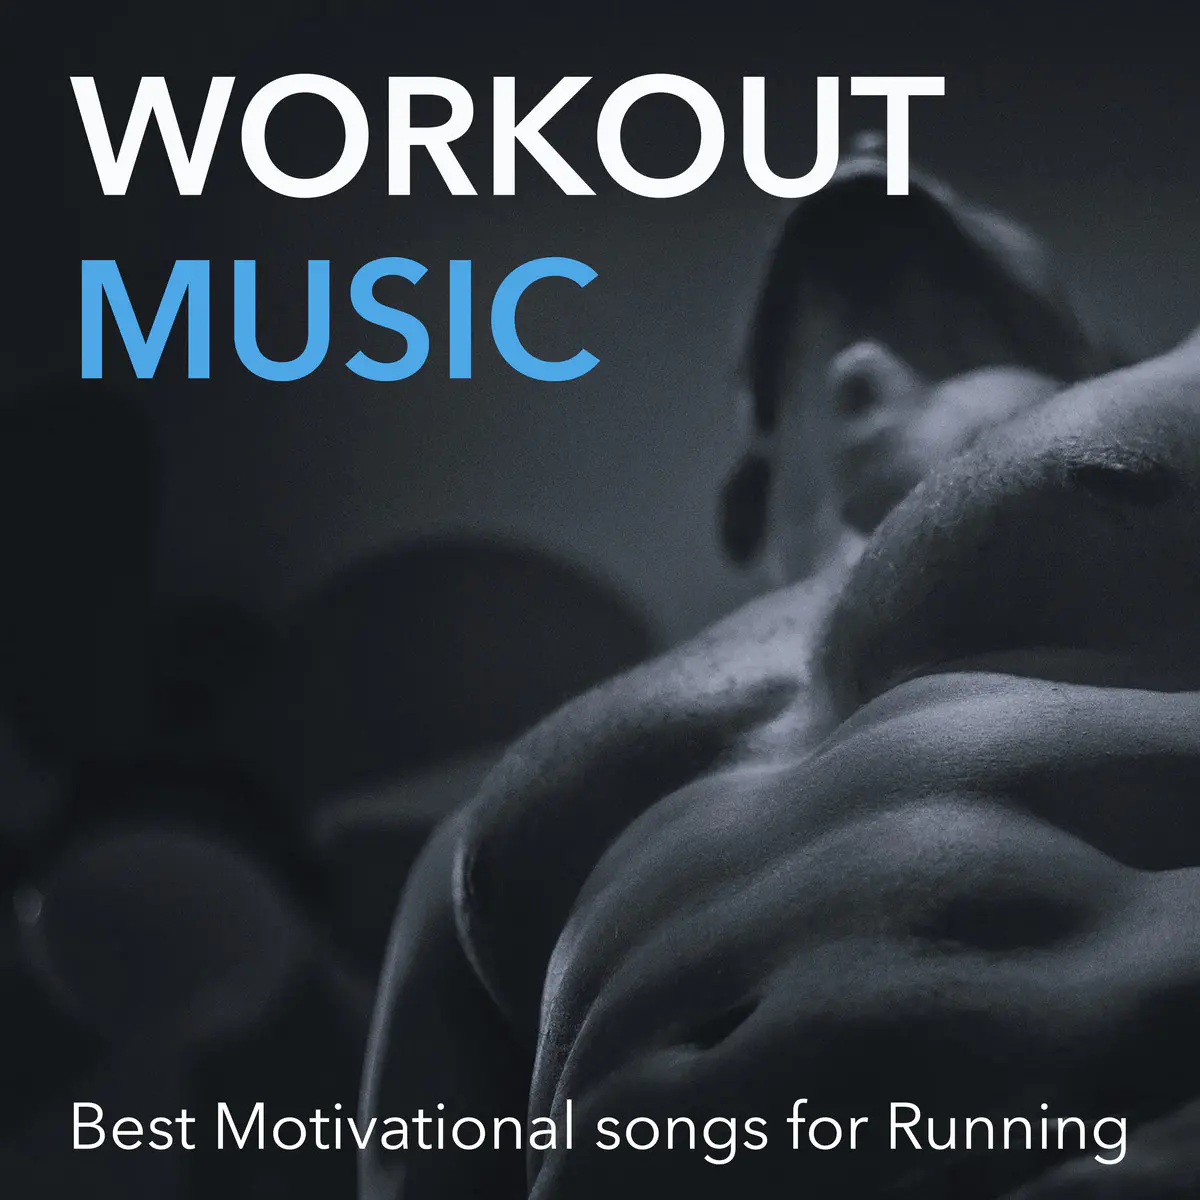 Don T You Worry Child Lyrics In English Workout Music Best Motivational Songs For Running Workout Songs For Gym Motivation Training Don T You Worry Child Song Lyrics In English Free Online On Gaana Com